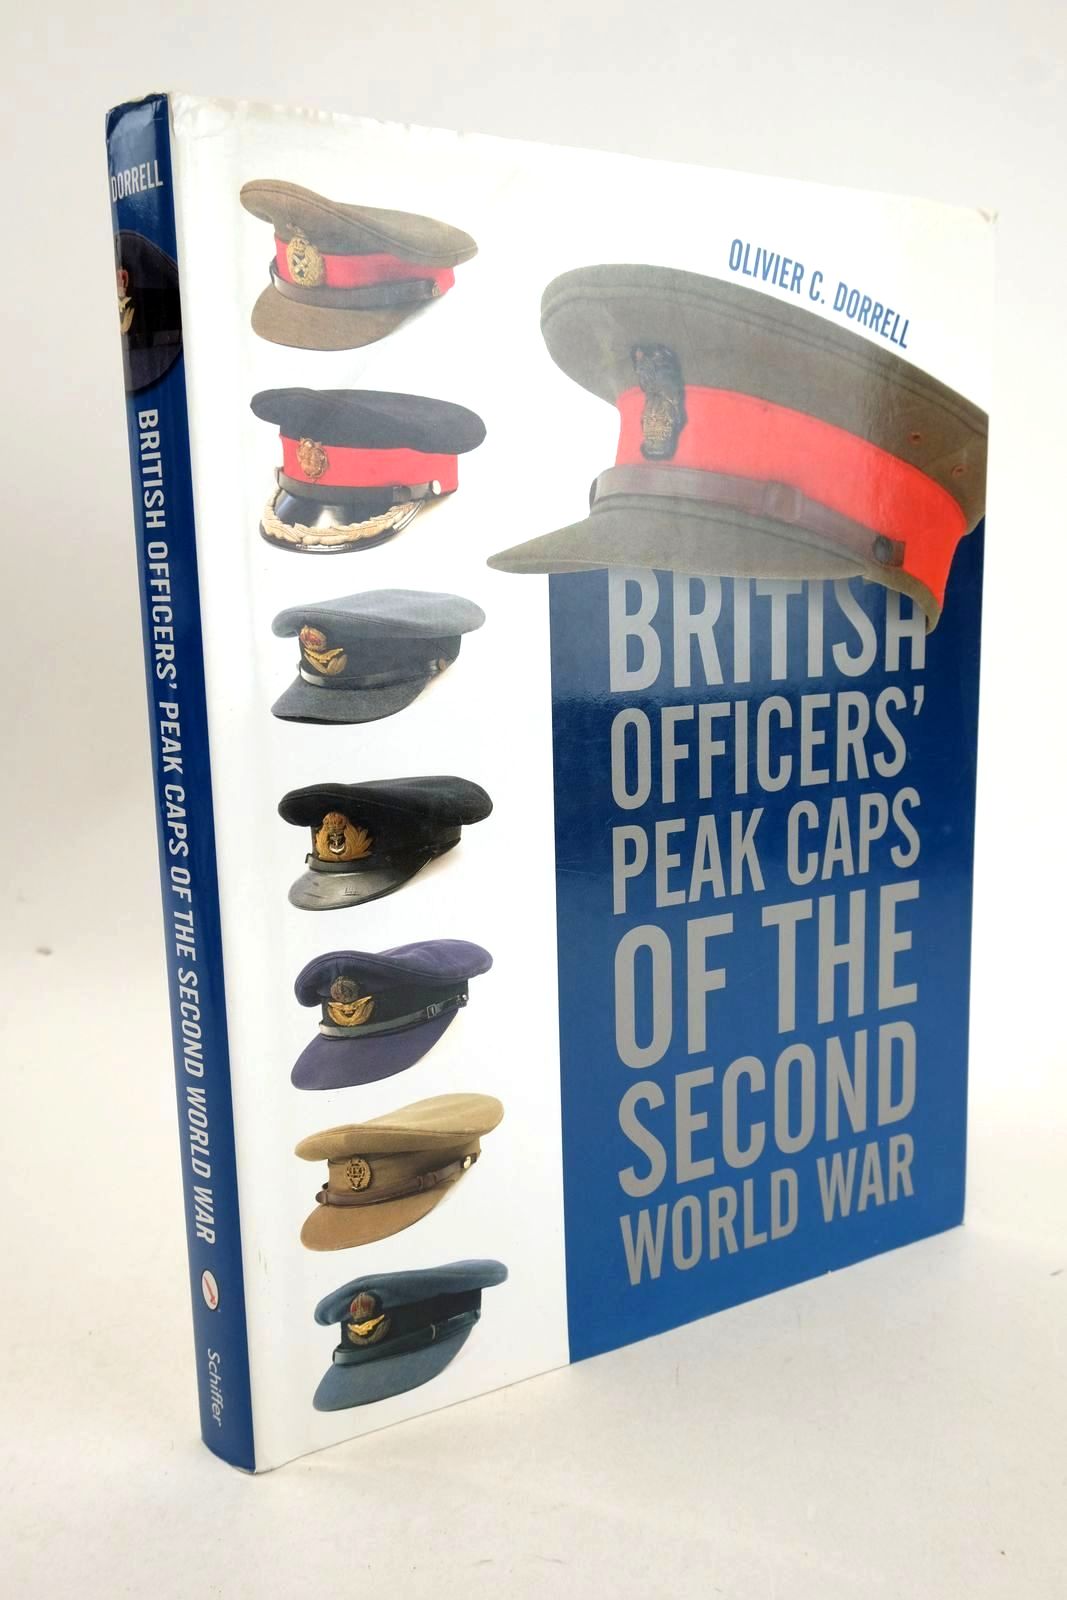 Photo of BRITISH OFFICERS' PEAK CAPS OF THE SECOND WORLD WAR written by Dorrell, Olivier C. published by Schiffer Publishing Ltd. (STOCK CODE: 1327030)  for sale by Stella & Rose's Books